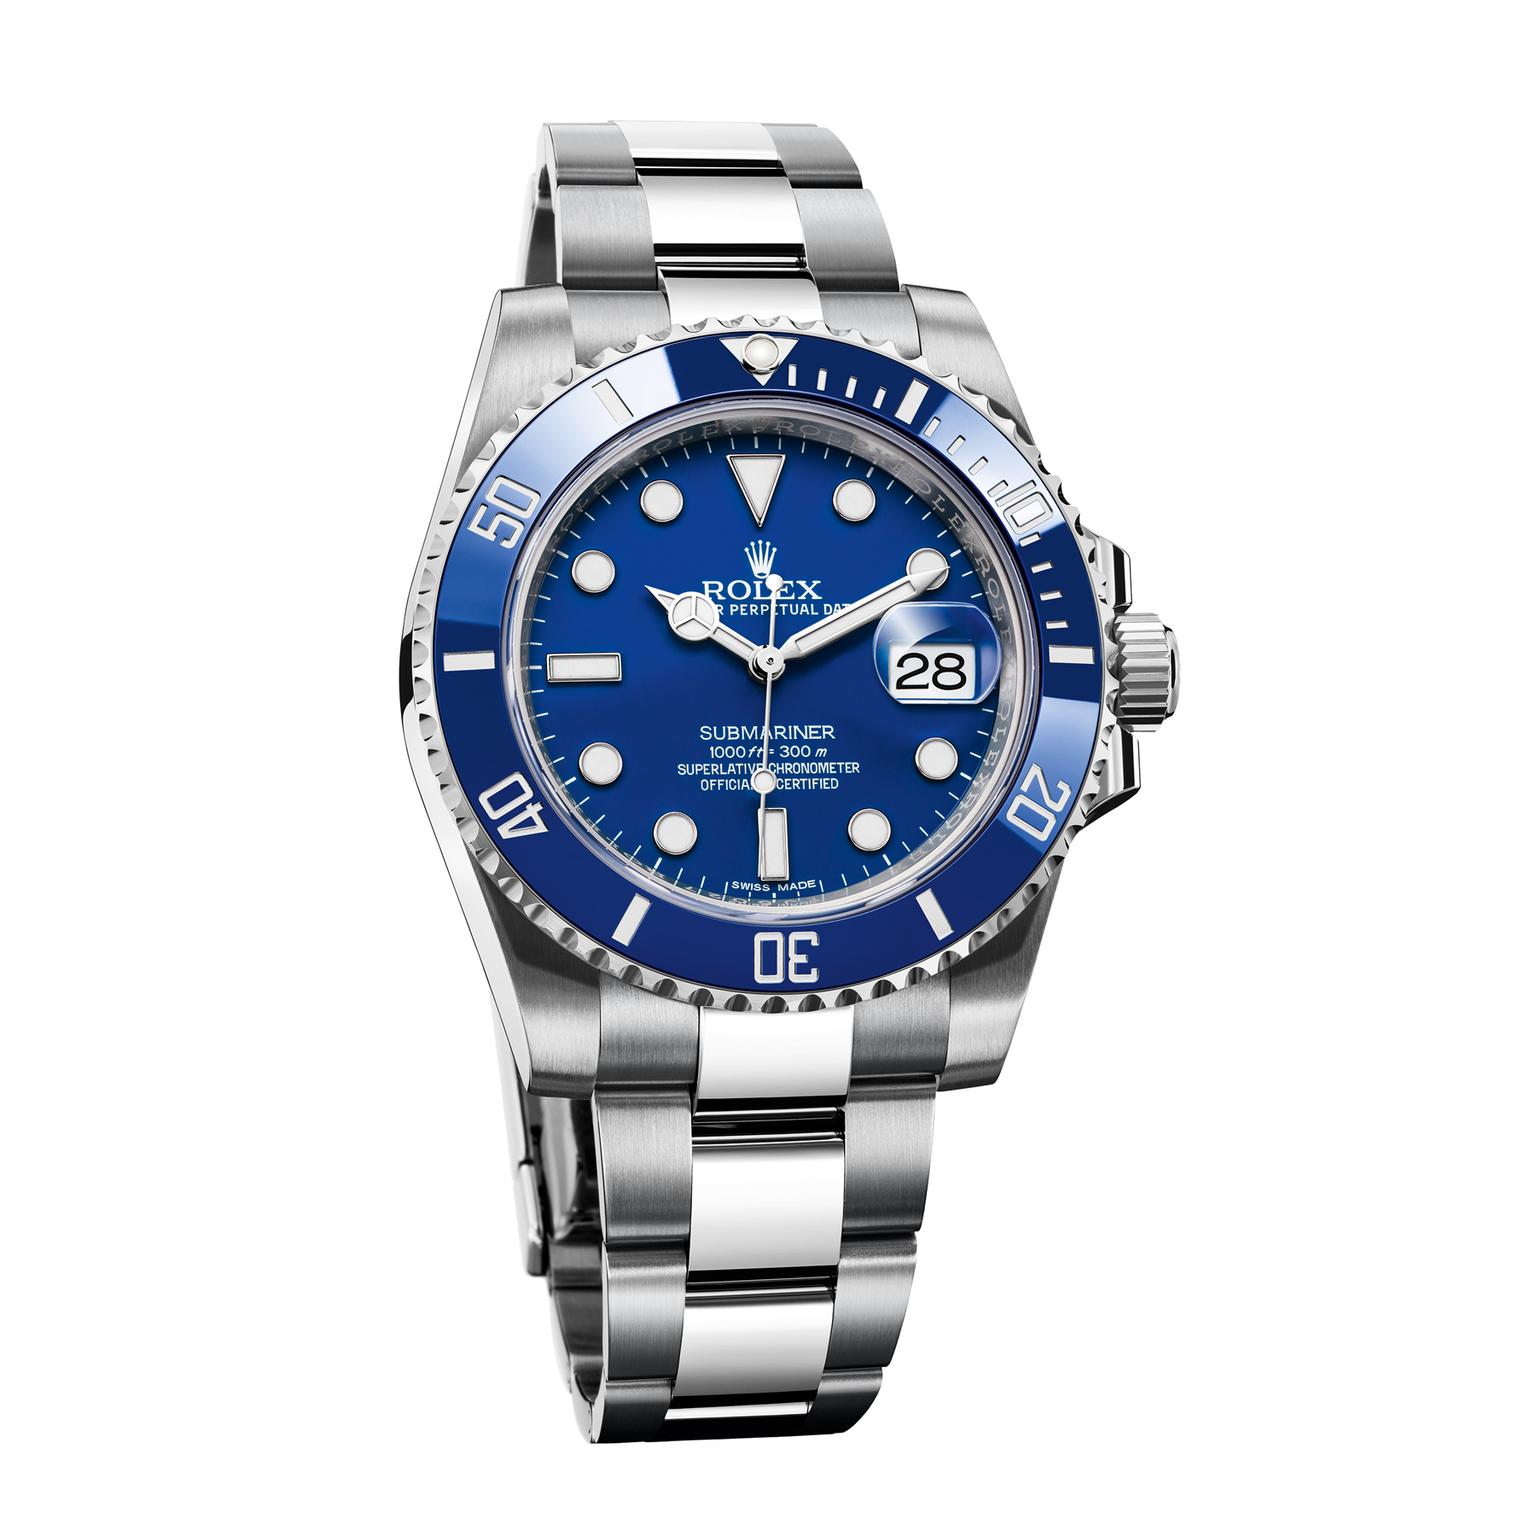 The truth about Rolex prices | The 